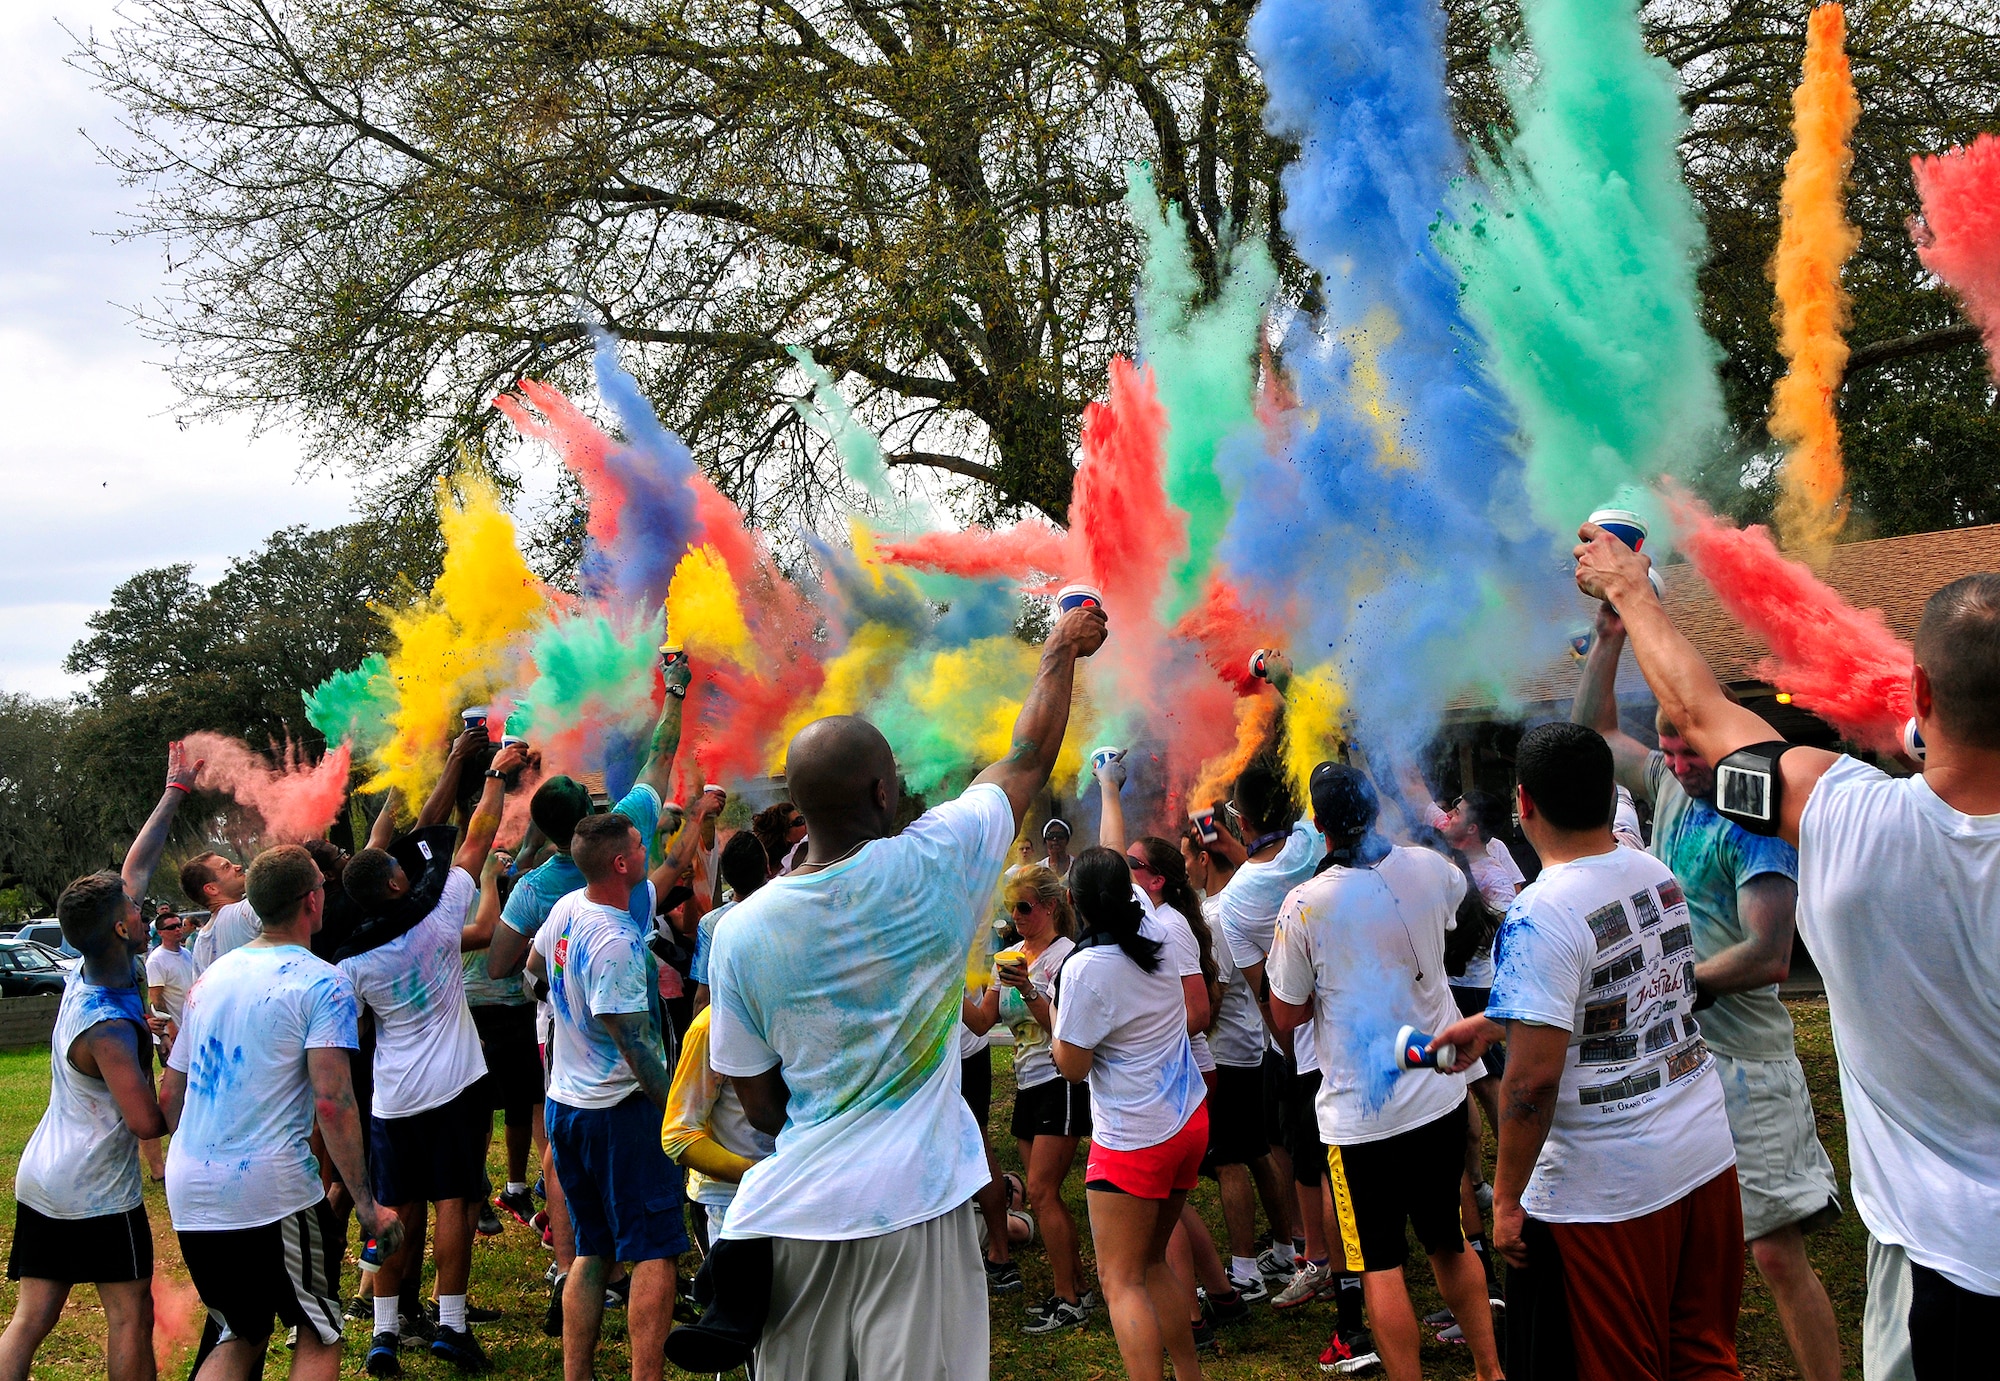 Participants get colorful during the Color Me Aware fun run April 4, at Eglin Air Force Base, Fla.  Approximately 30 volunteers helped more than 450 participants get colorful during three color zones of the three-mile run.  The event highlighted the start of Sexual Assault Awareness Month. (U.S. Air Force photo/Tech. Sgt. Cheryl Foster)